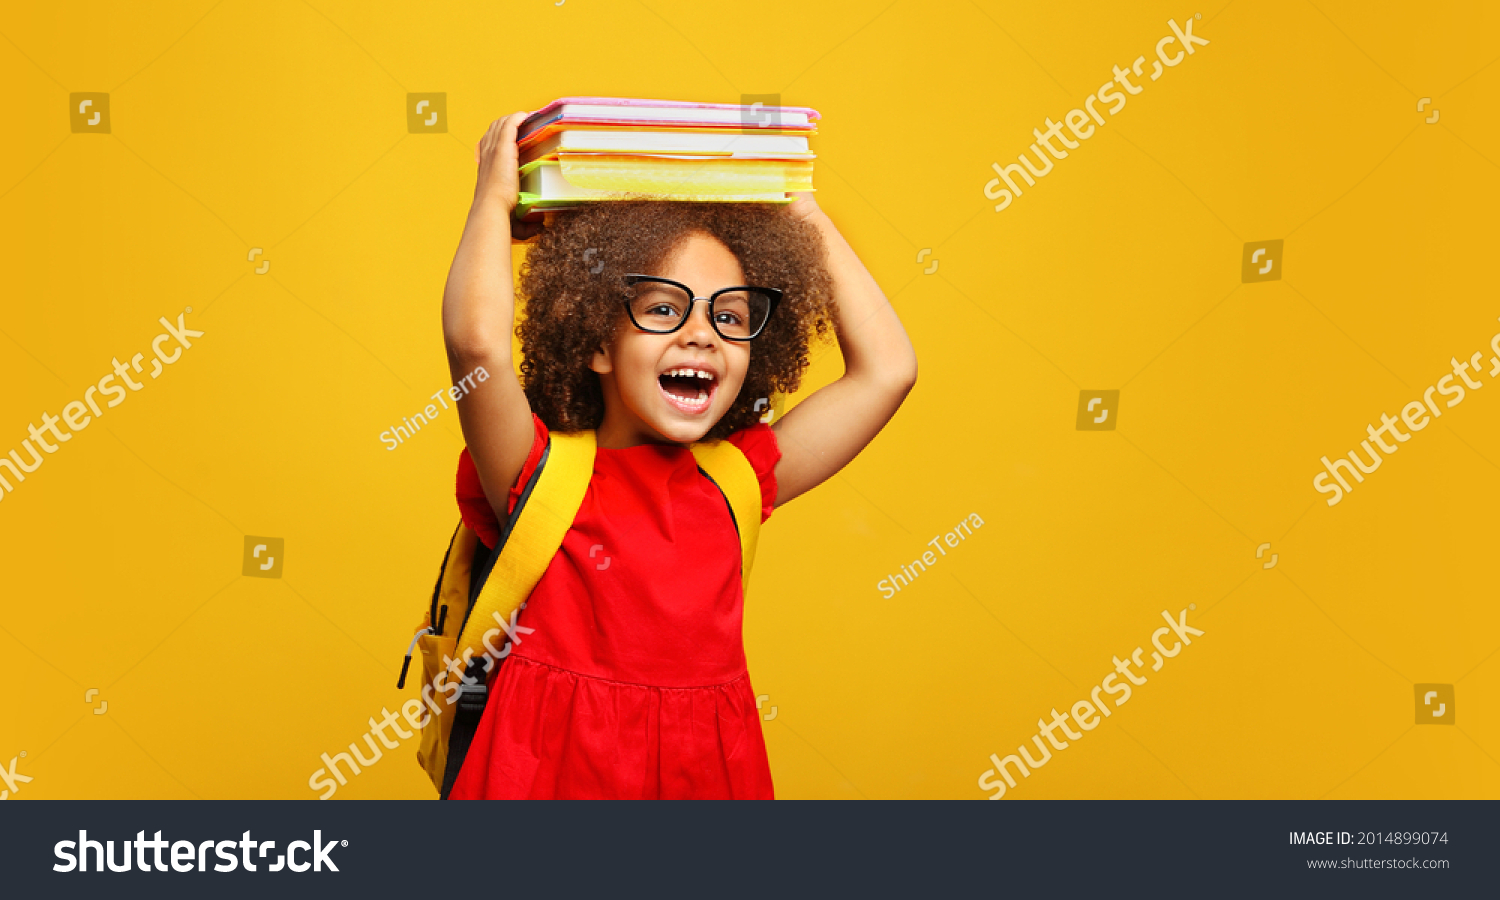 funny smiling Black child school girl with glasses hold books on her head. Yellow background #2014899074